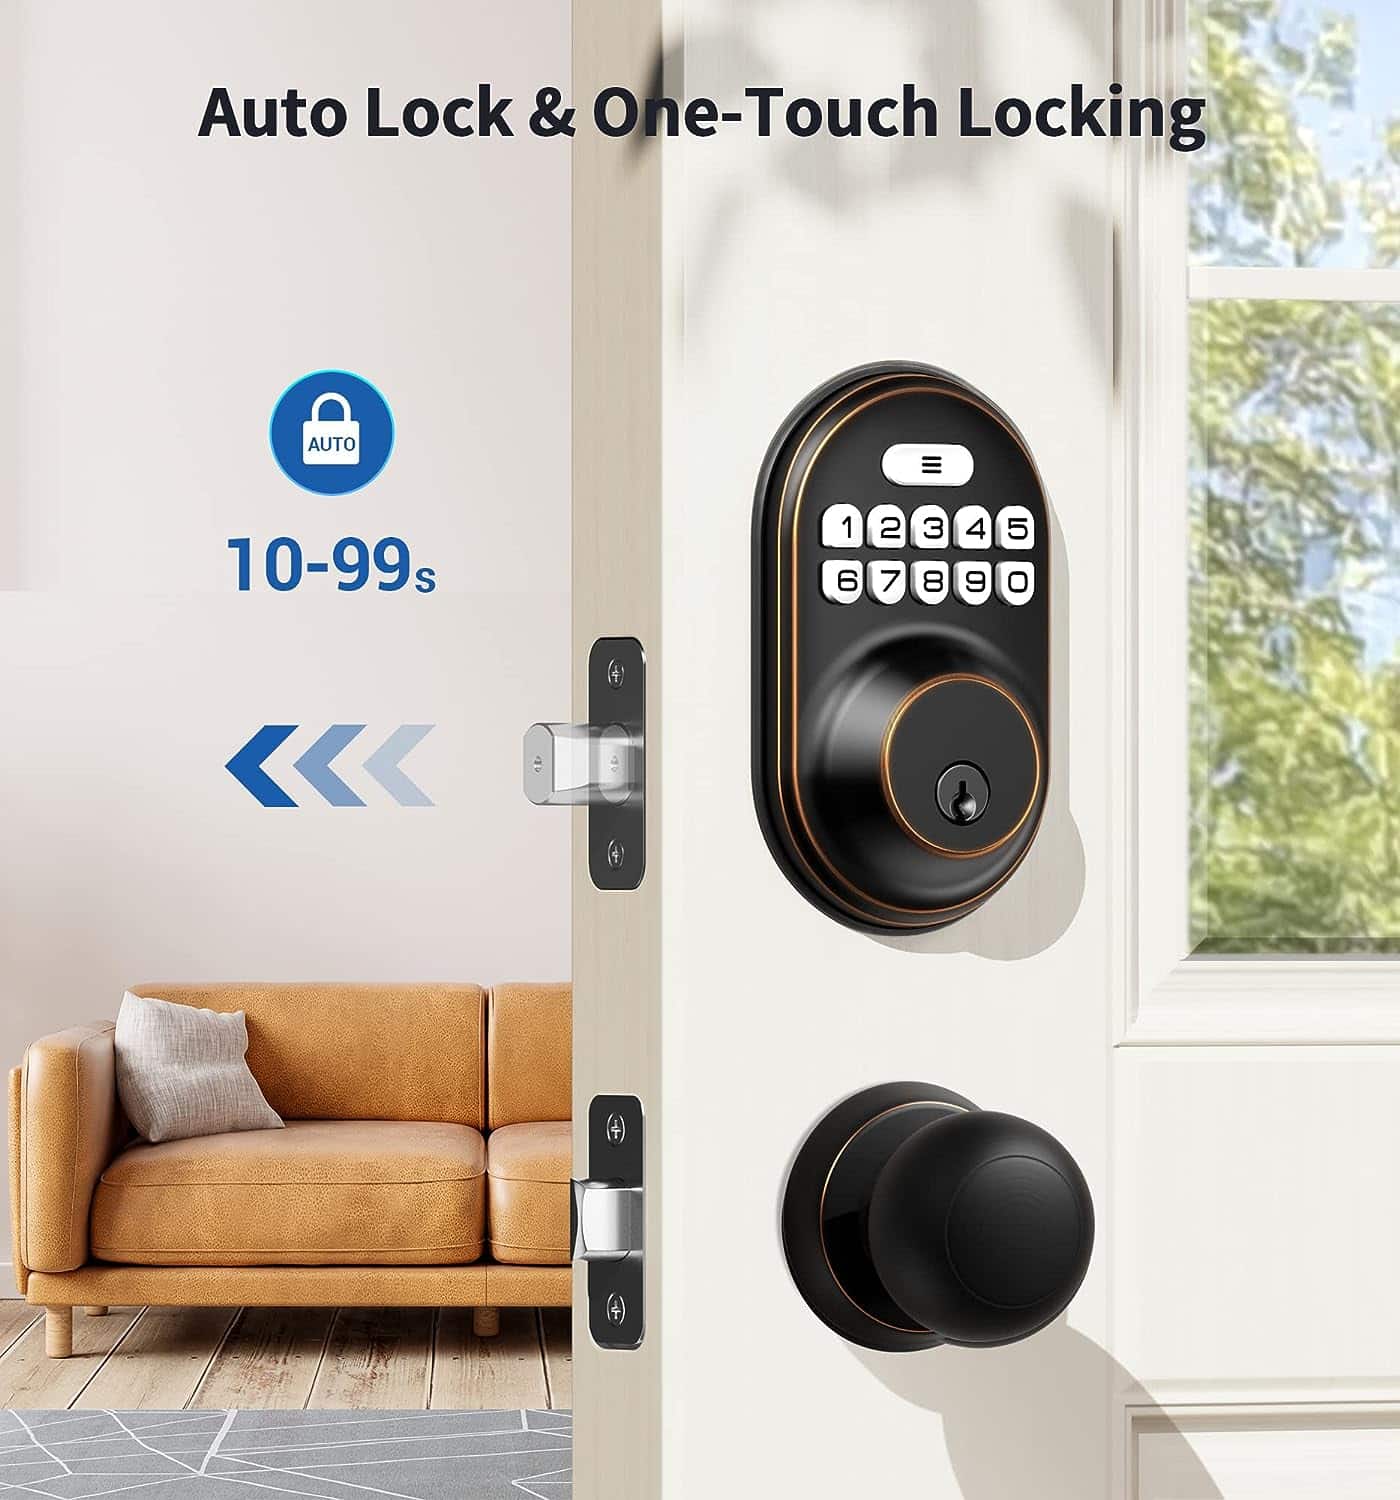 Veise Keyless Entry Door Lock Review: The Perfect Blend of Security and Convenience